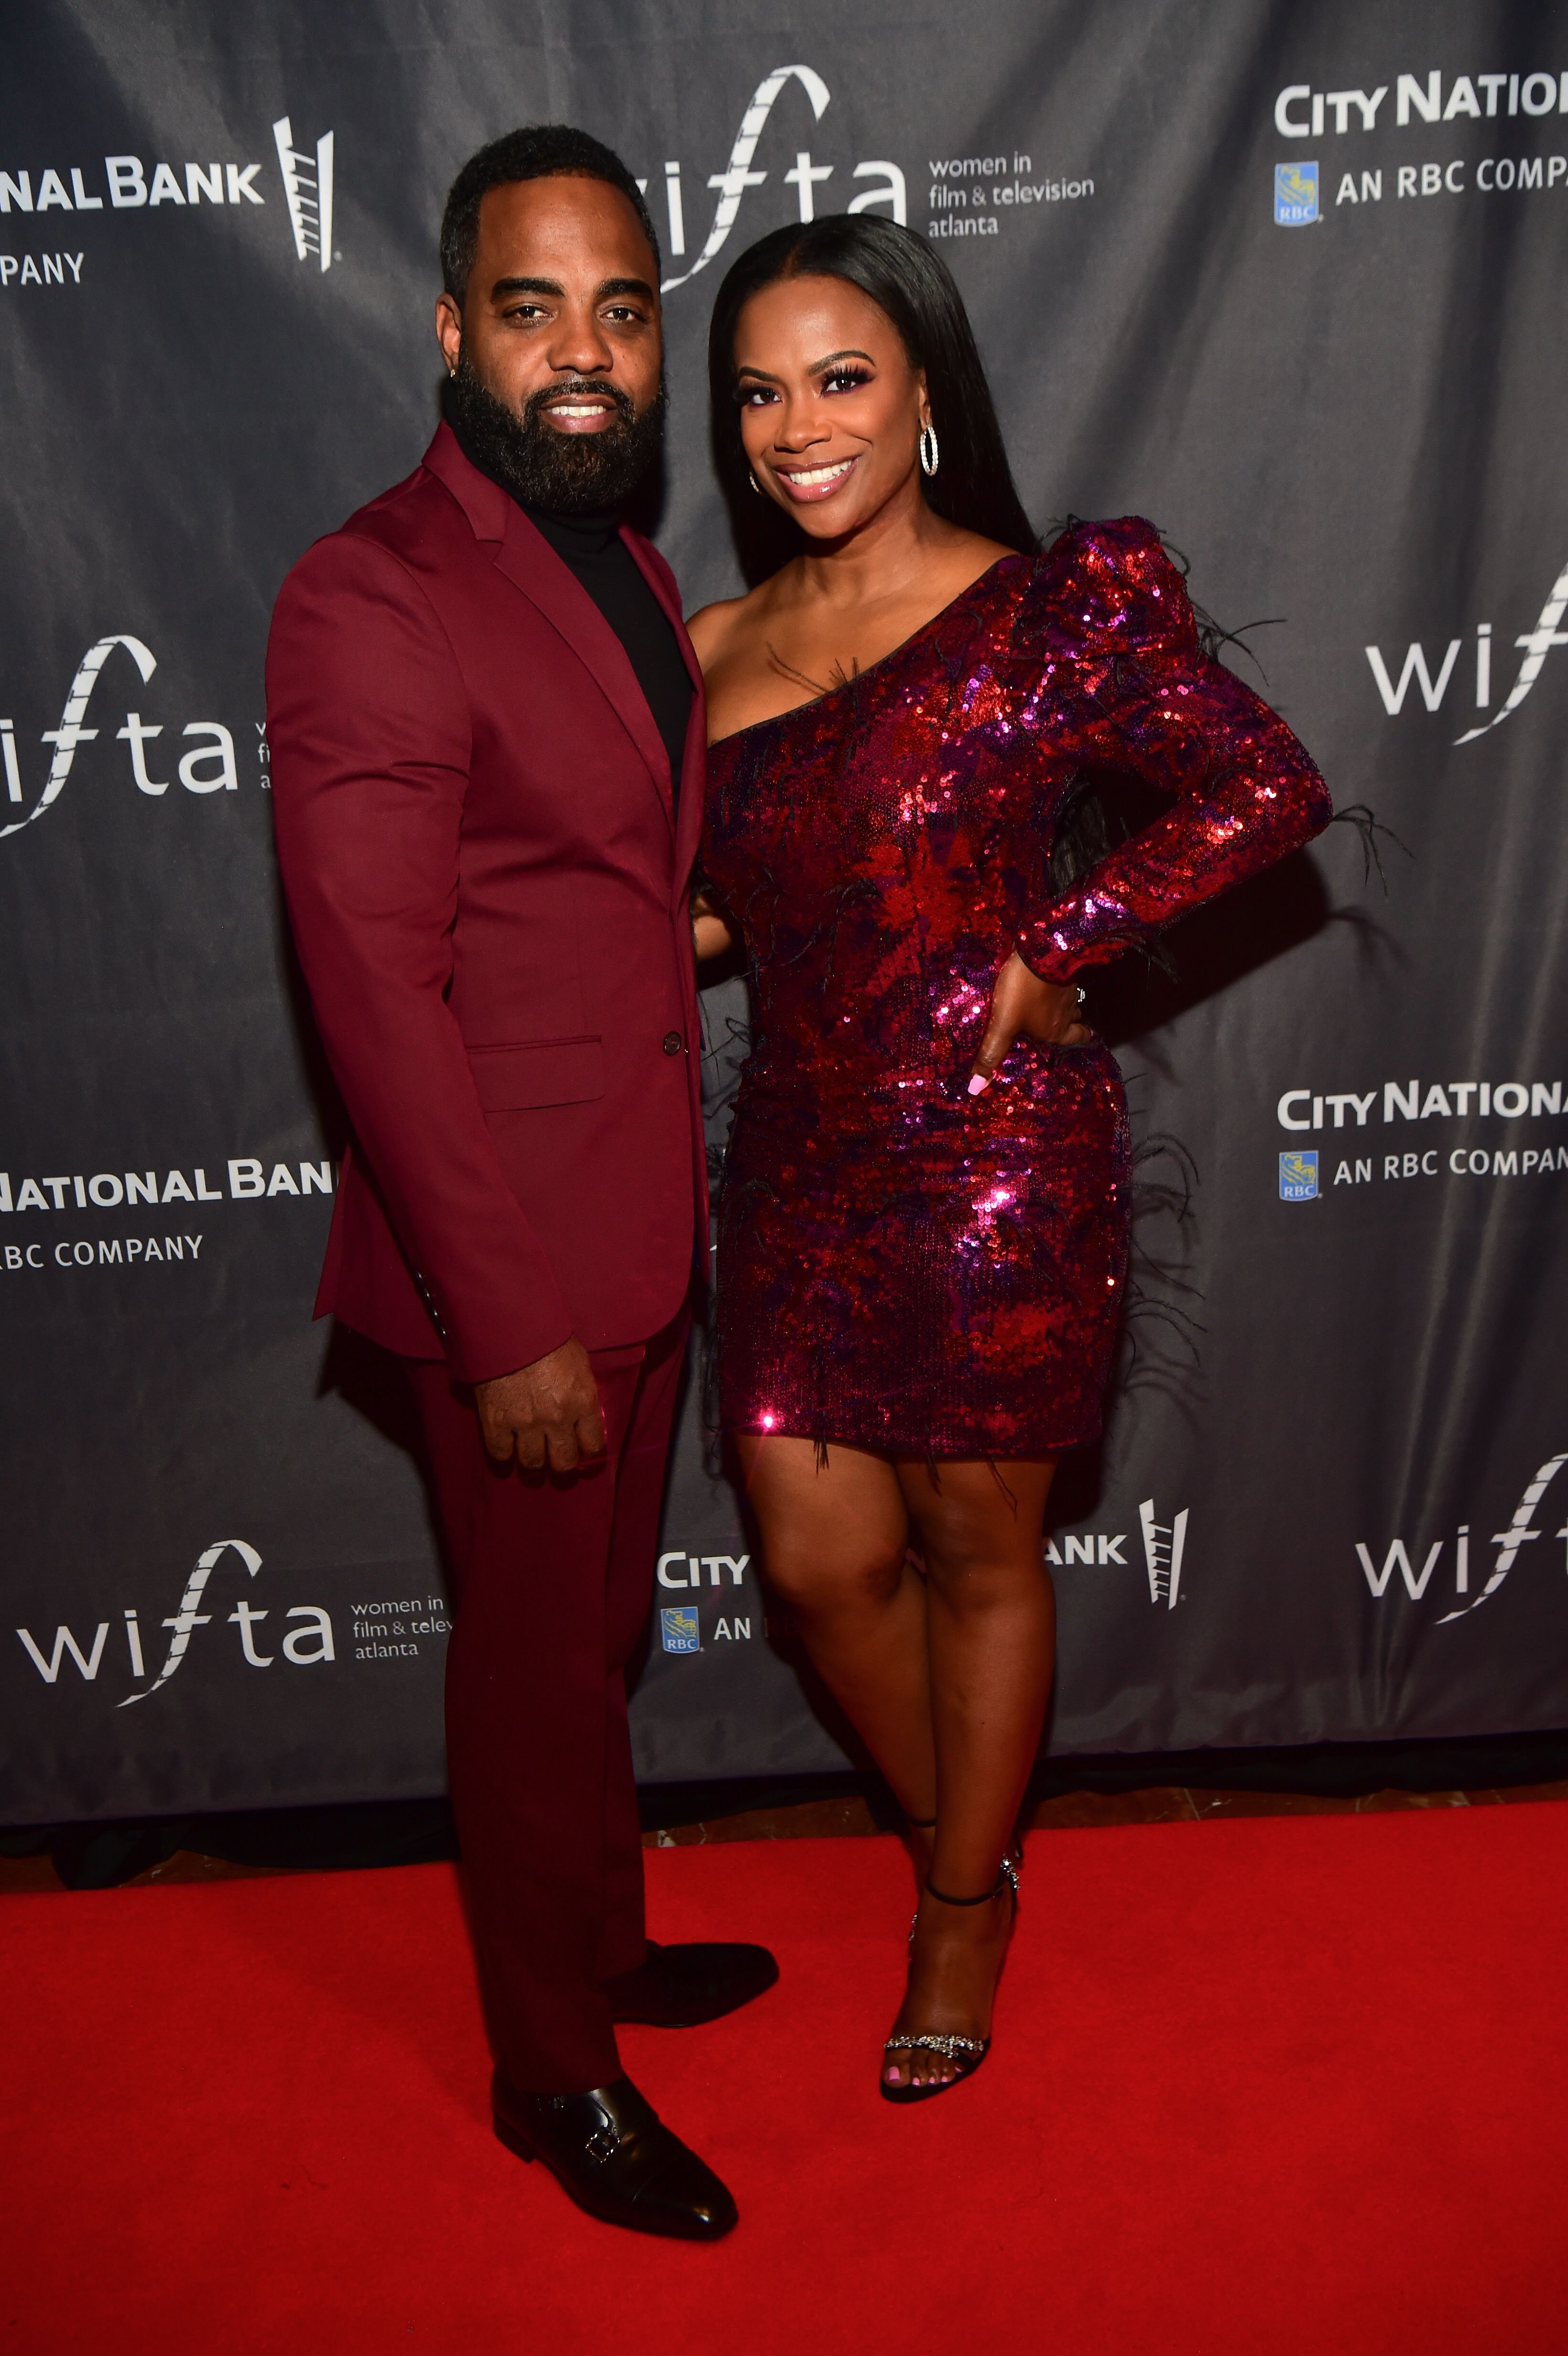 Todd Tucker and Kandi Burruss arrive on the red carpet at The Sneak Peek at Agency Restaurant-Bar on November 9, 2019, in Atlanta, Georgia | Source: Getty Images